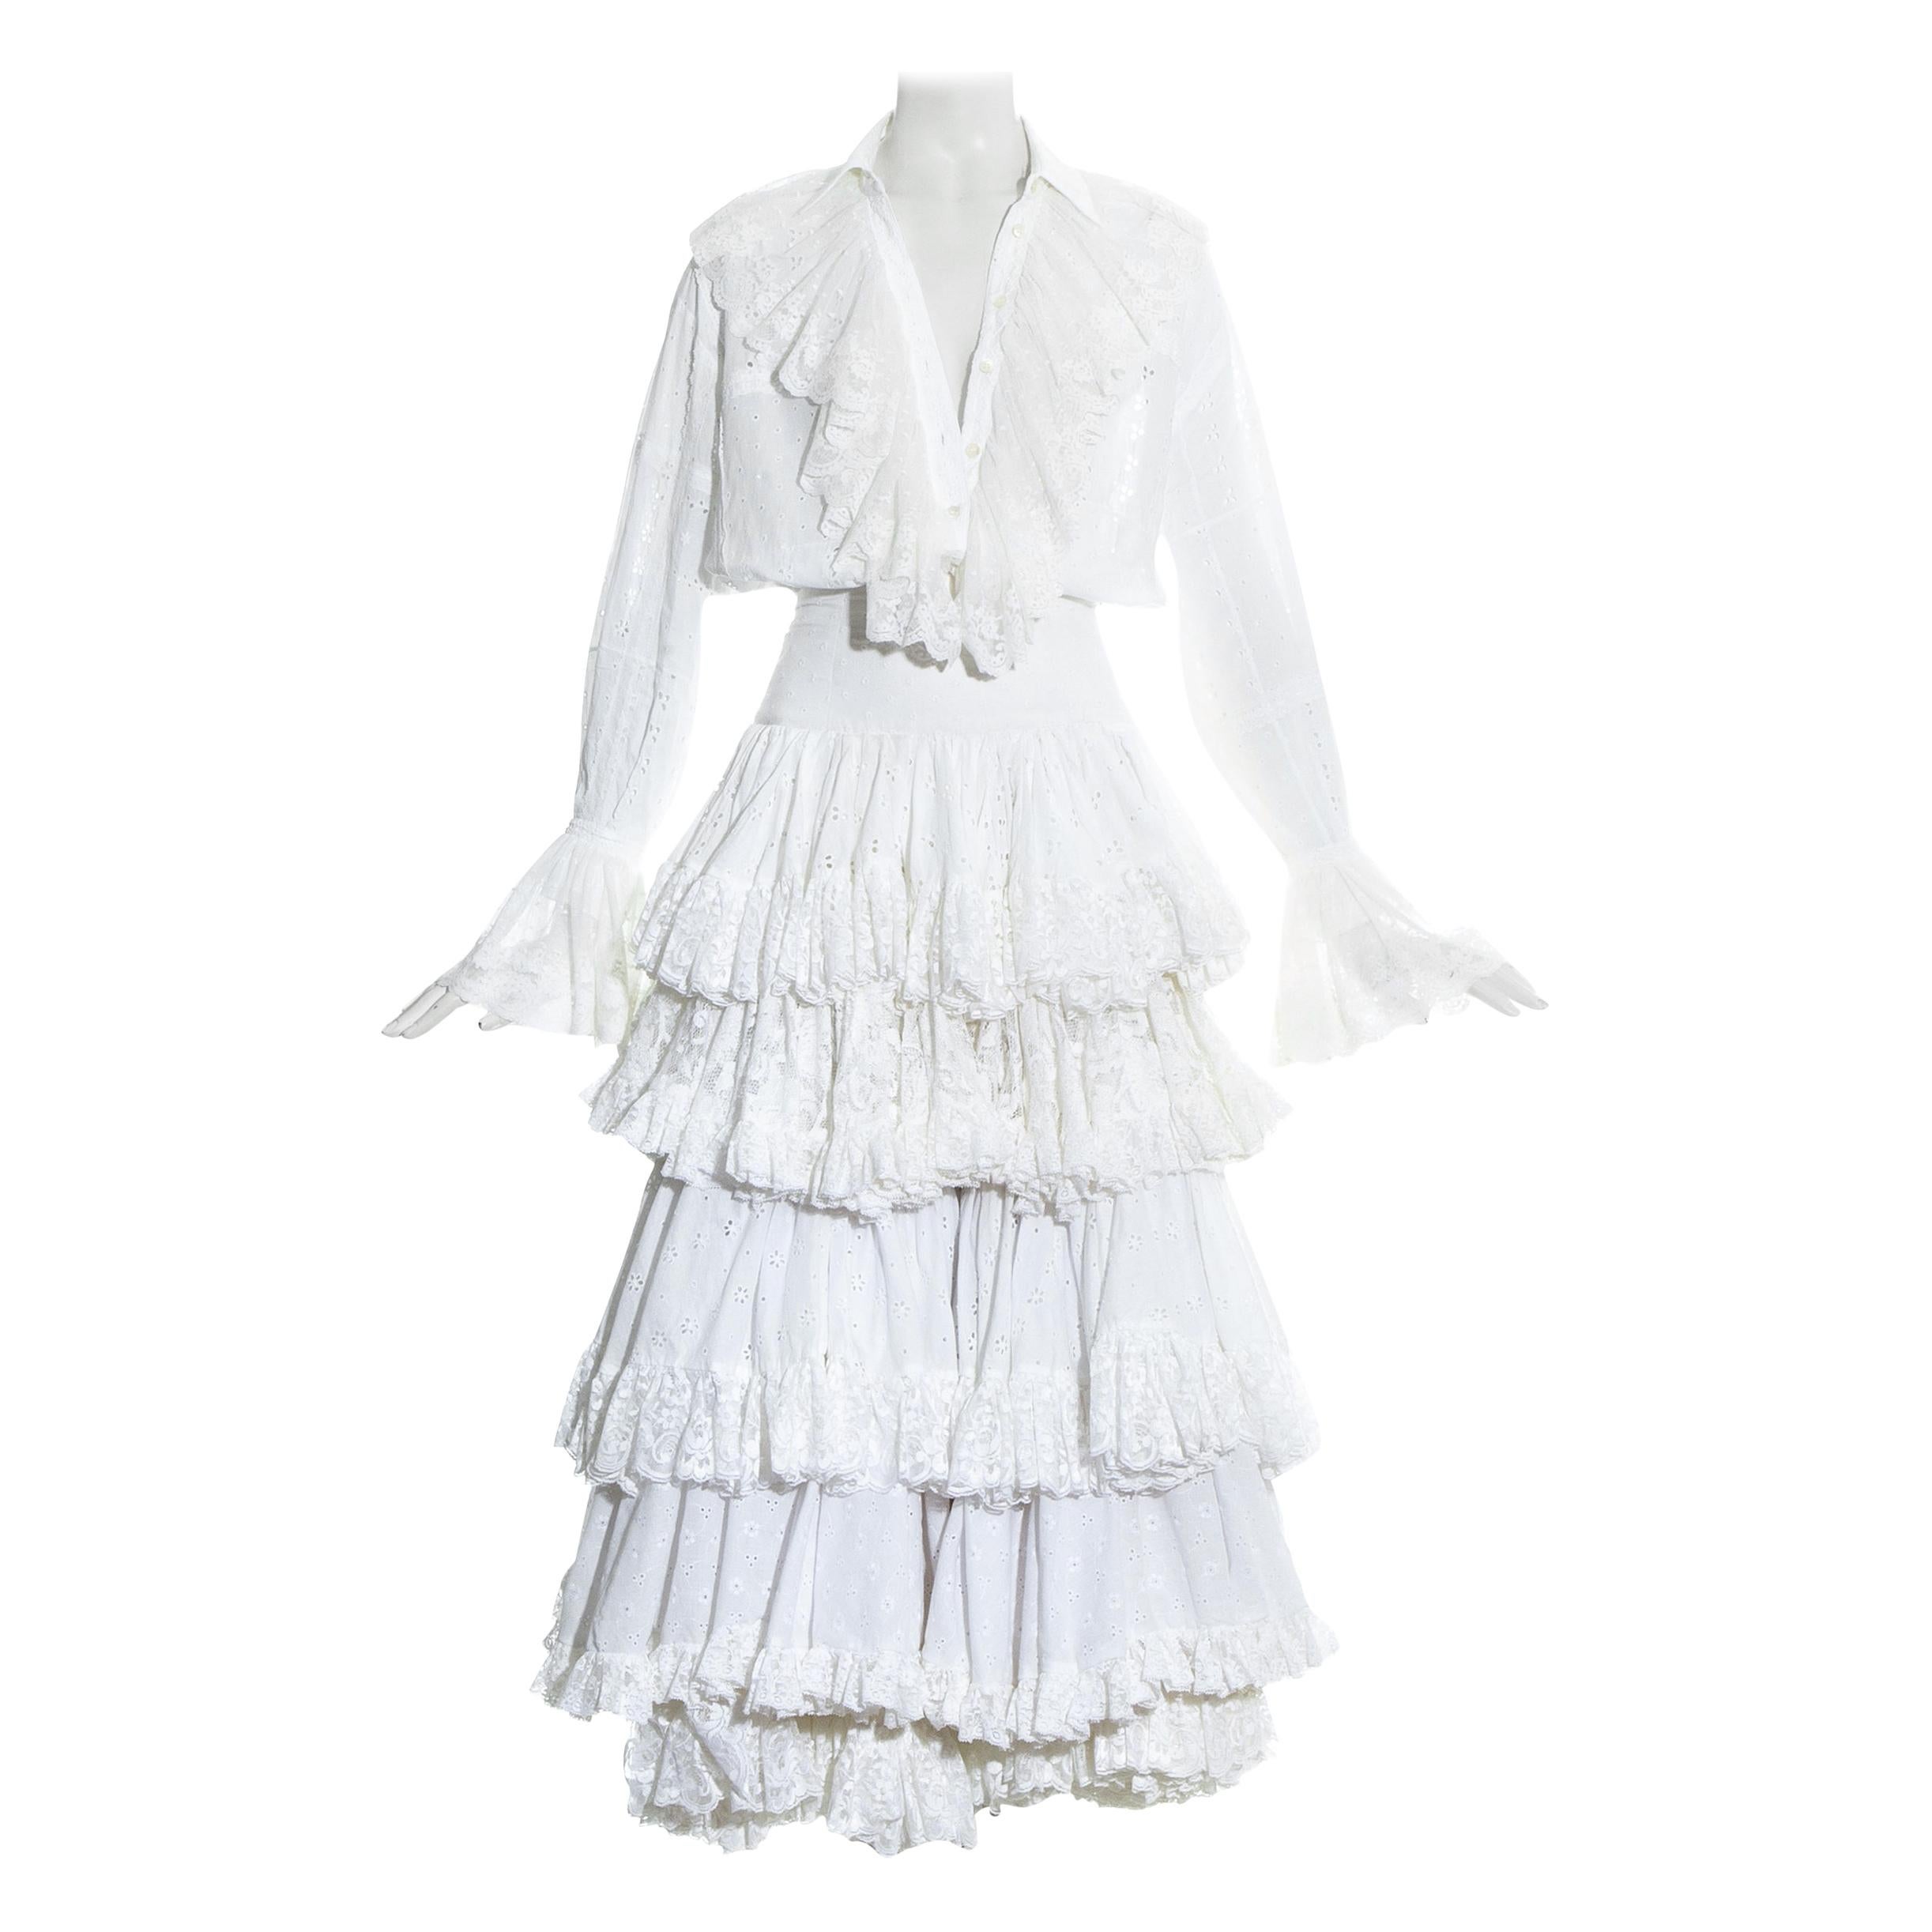 Dolce & Gabbana white broderie anglaise and lace skirt and blouse, ss 1993 For Sale